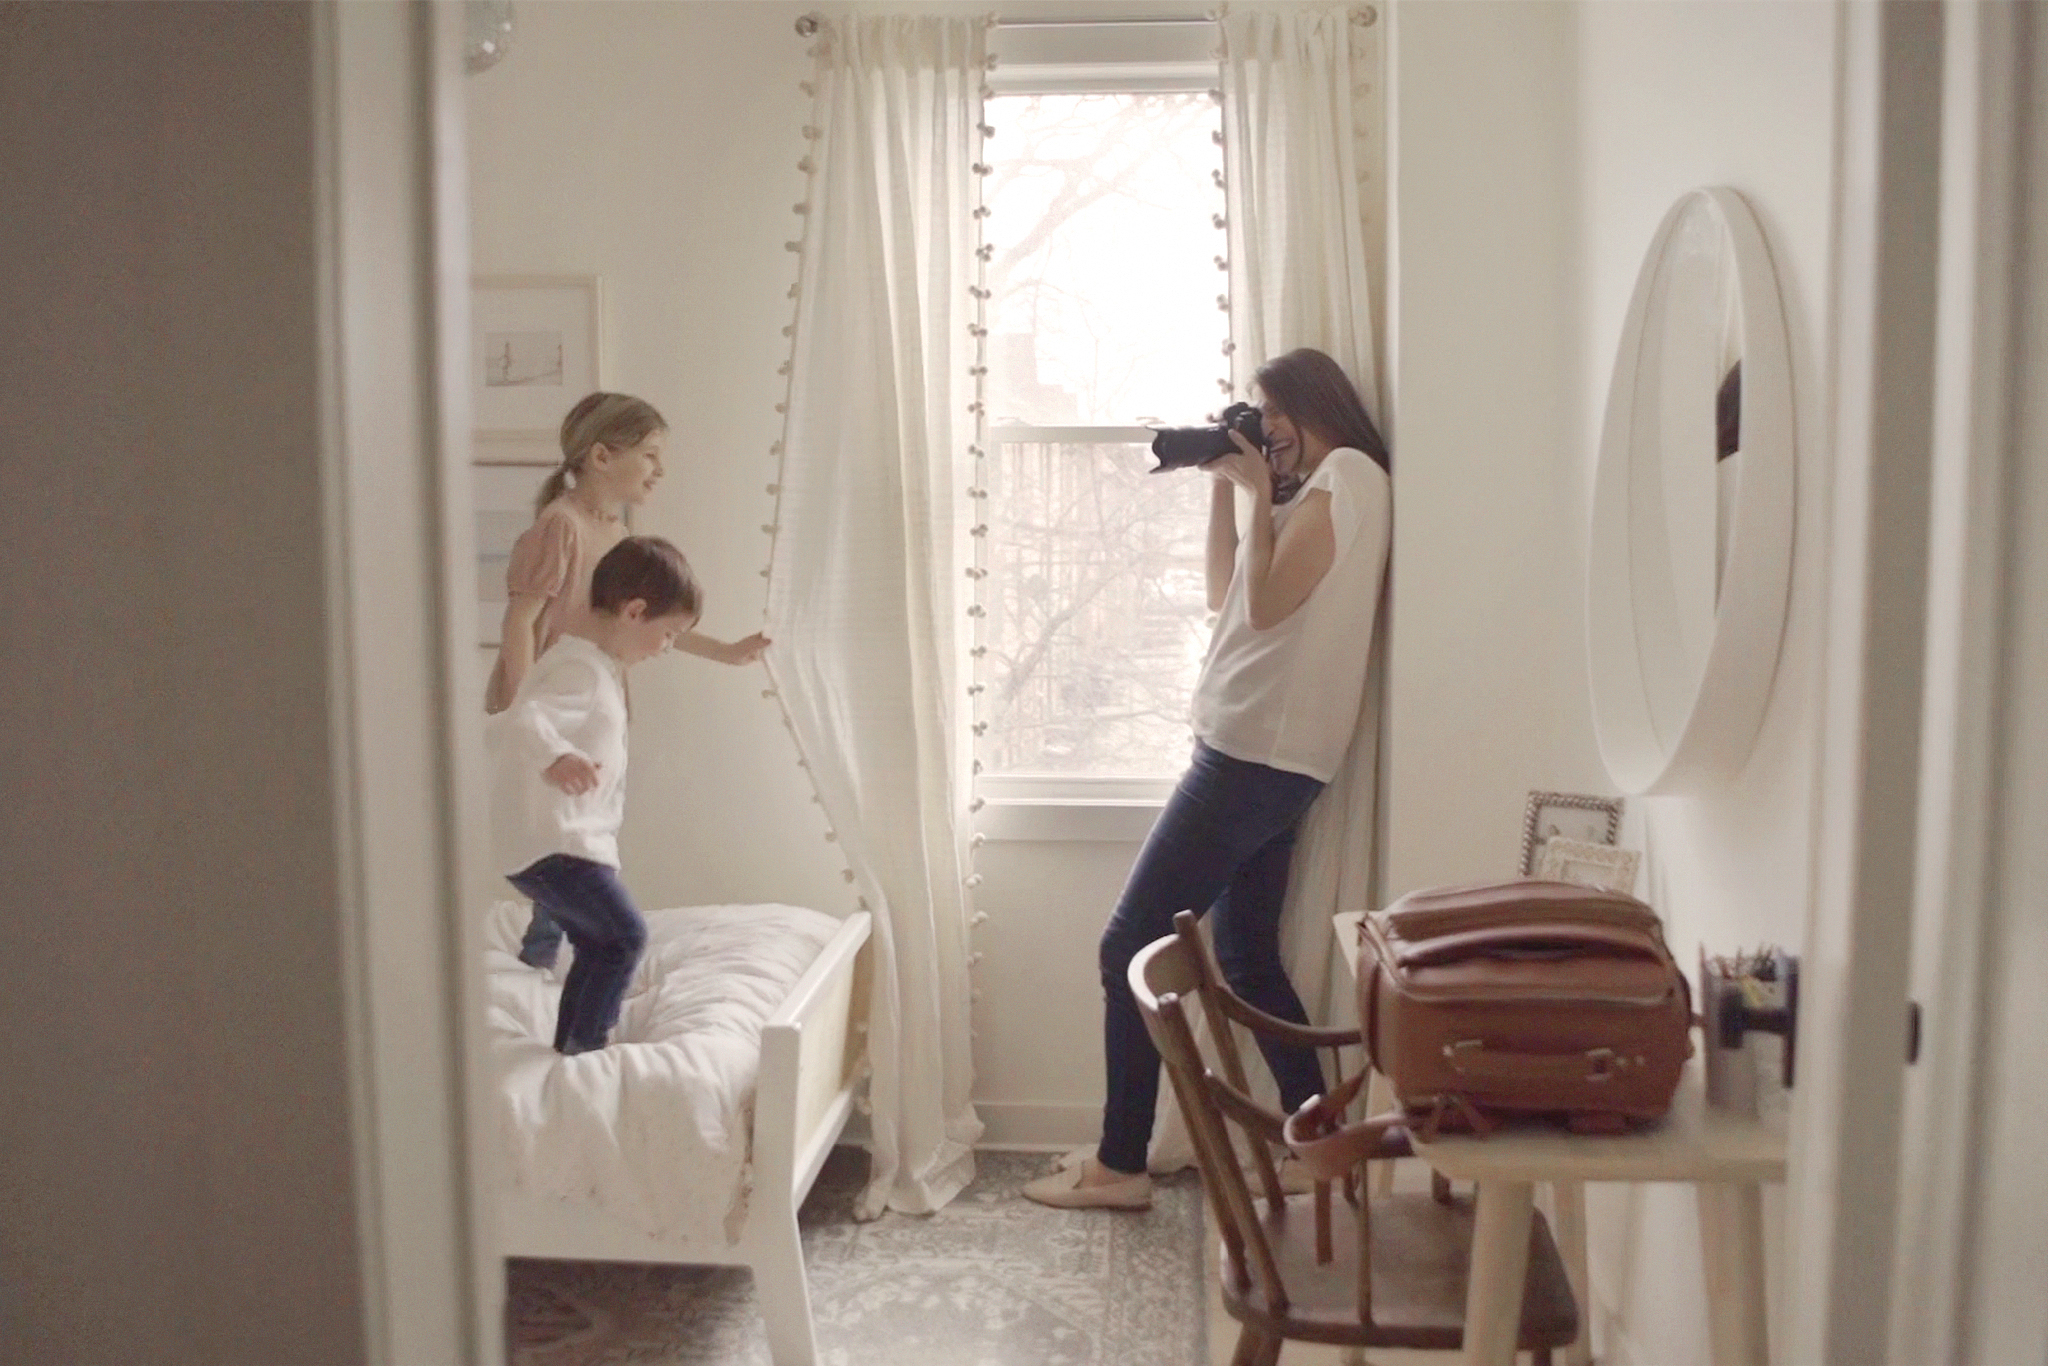 Family photographer Kira Noel takes a picture of two children inside a bedroom.